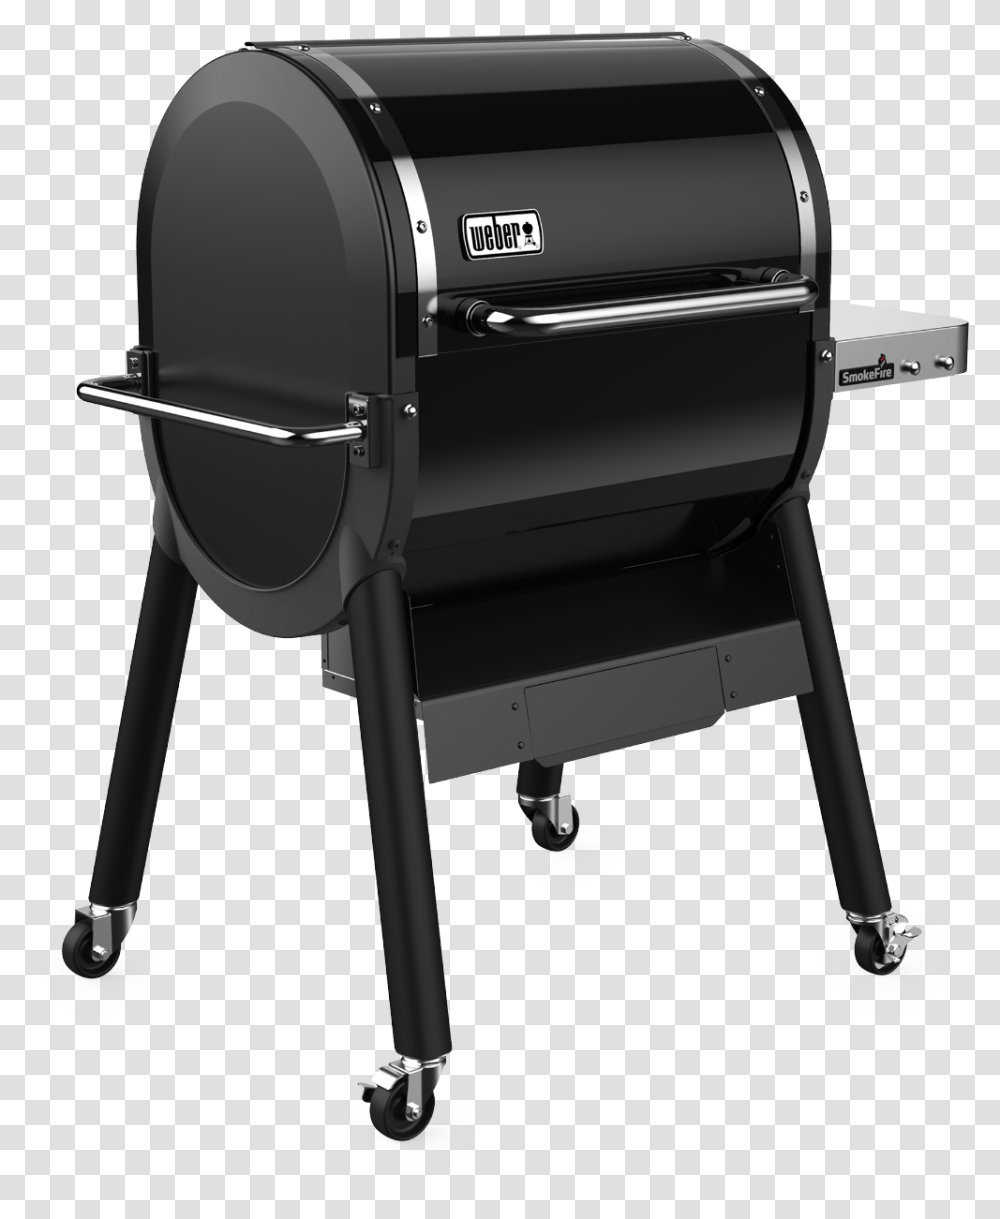 Smokefire Ex4 Wood Fired Pellet Grill View Weber Smoke Fire Grill, Chair, Furniture, Wheelchair Transparent Png